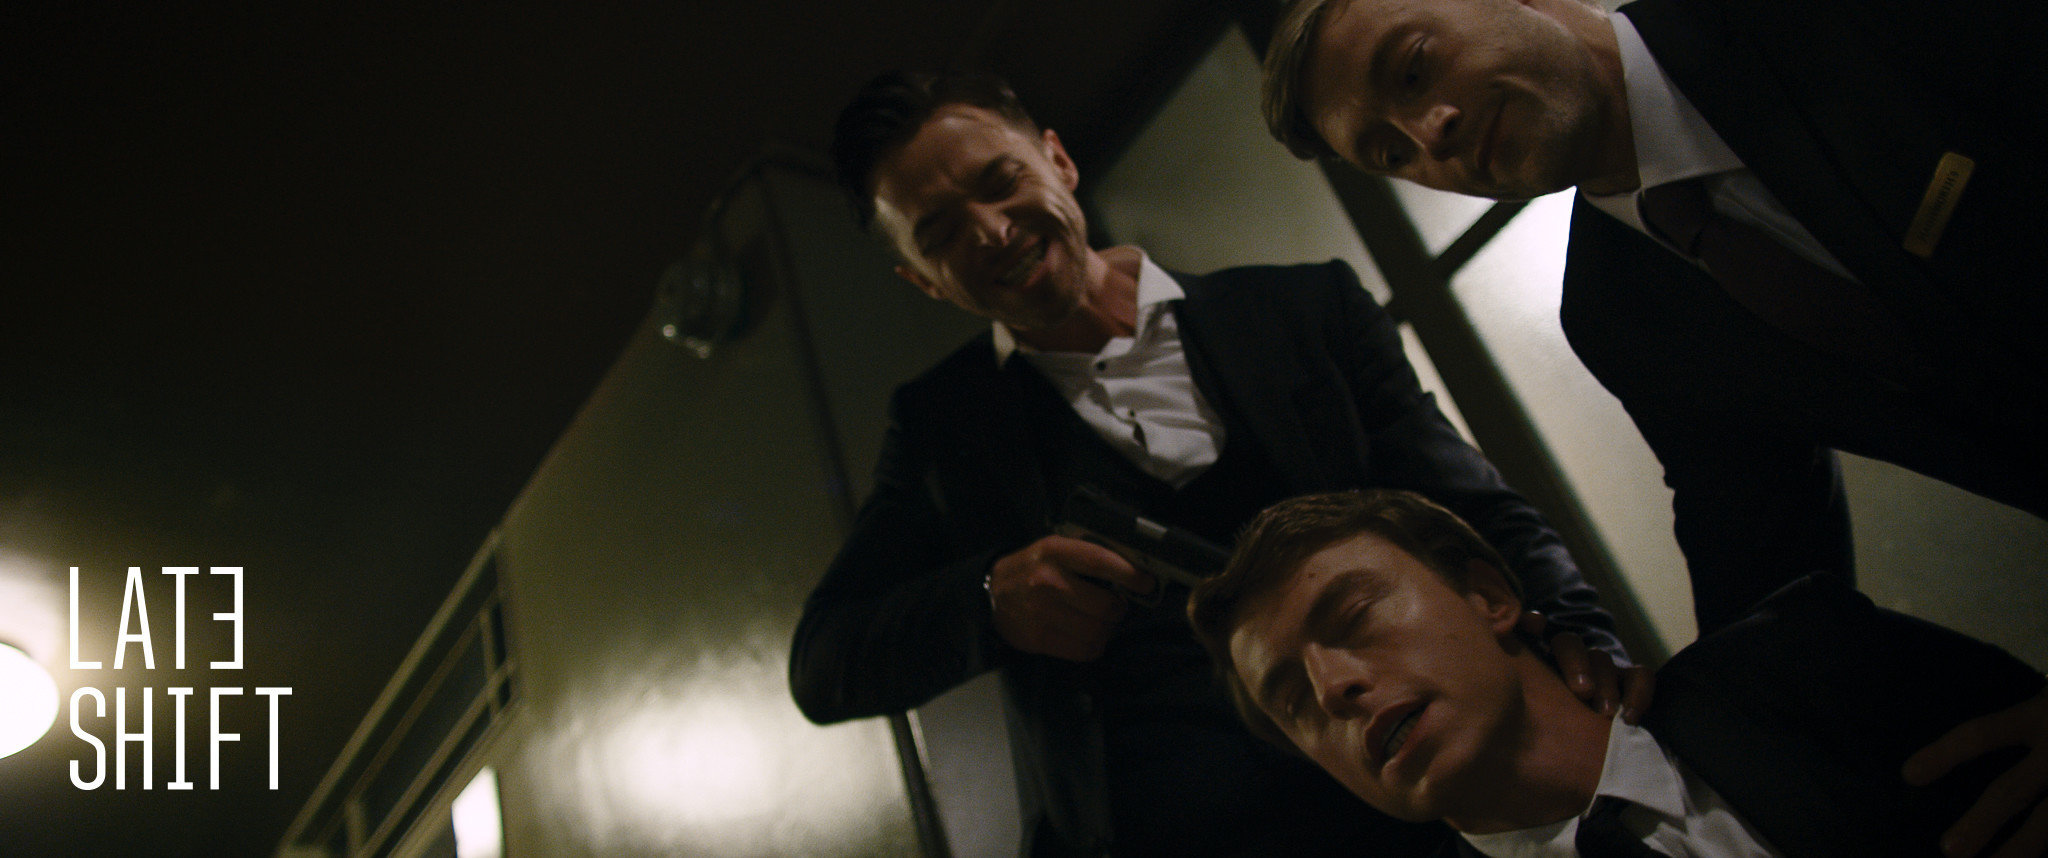 LATE SHIFT movie still. Actors Sol Heras, Joe Sowerbutts and Tom Phillips.